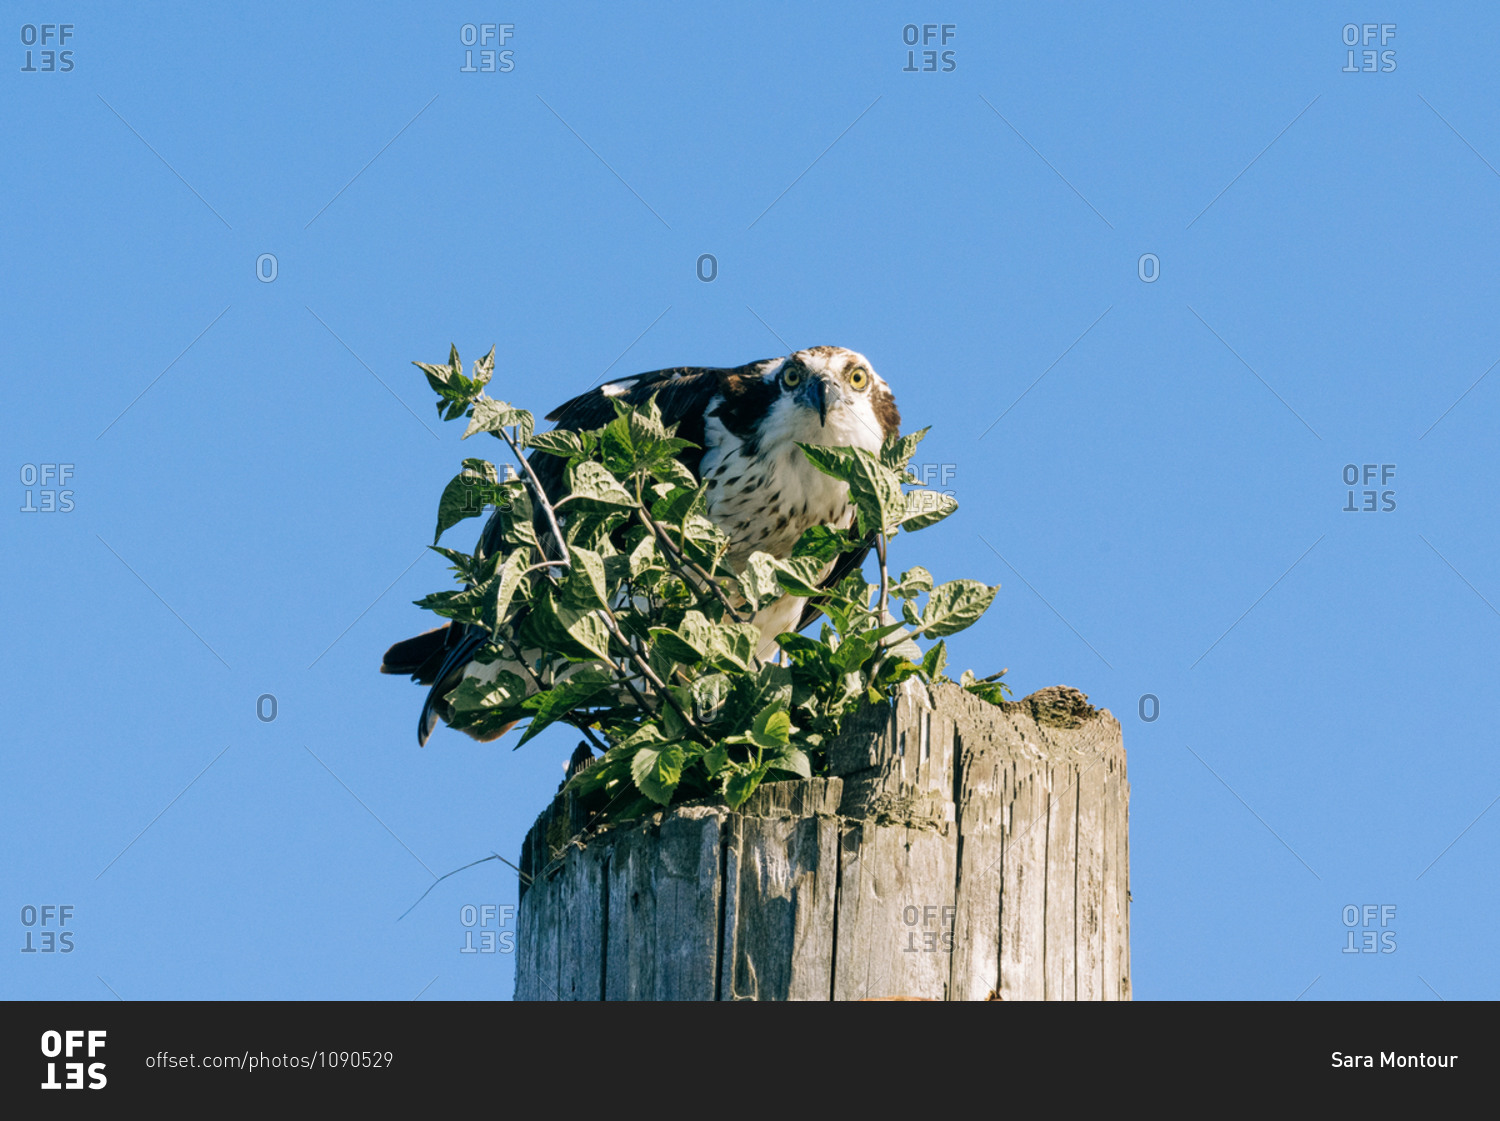 An angry Osprey perched on a wooden post with plants growing out of it in front of blue sky, Everett, Washington